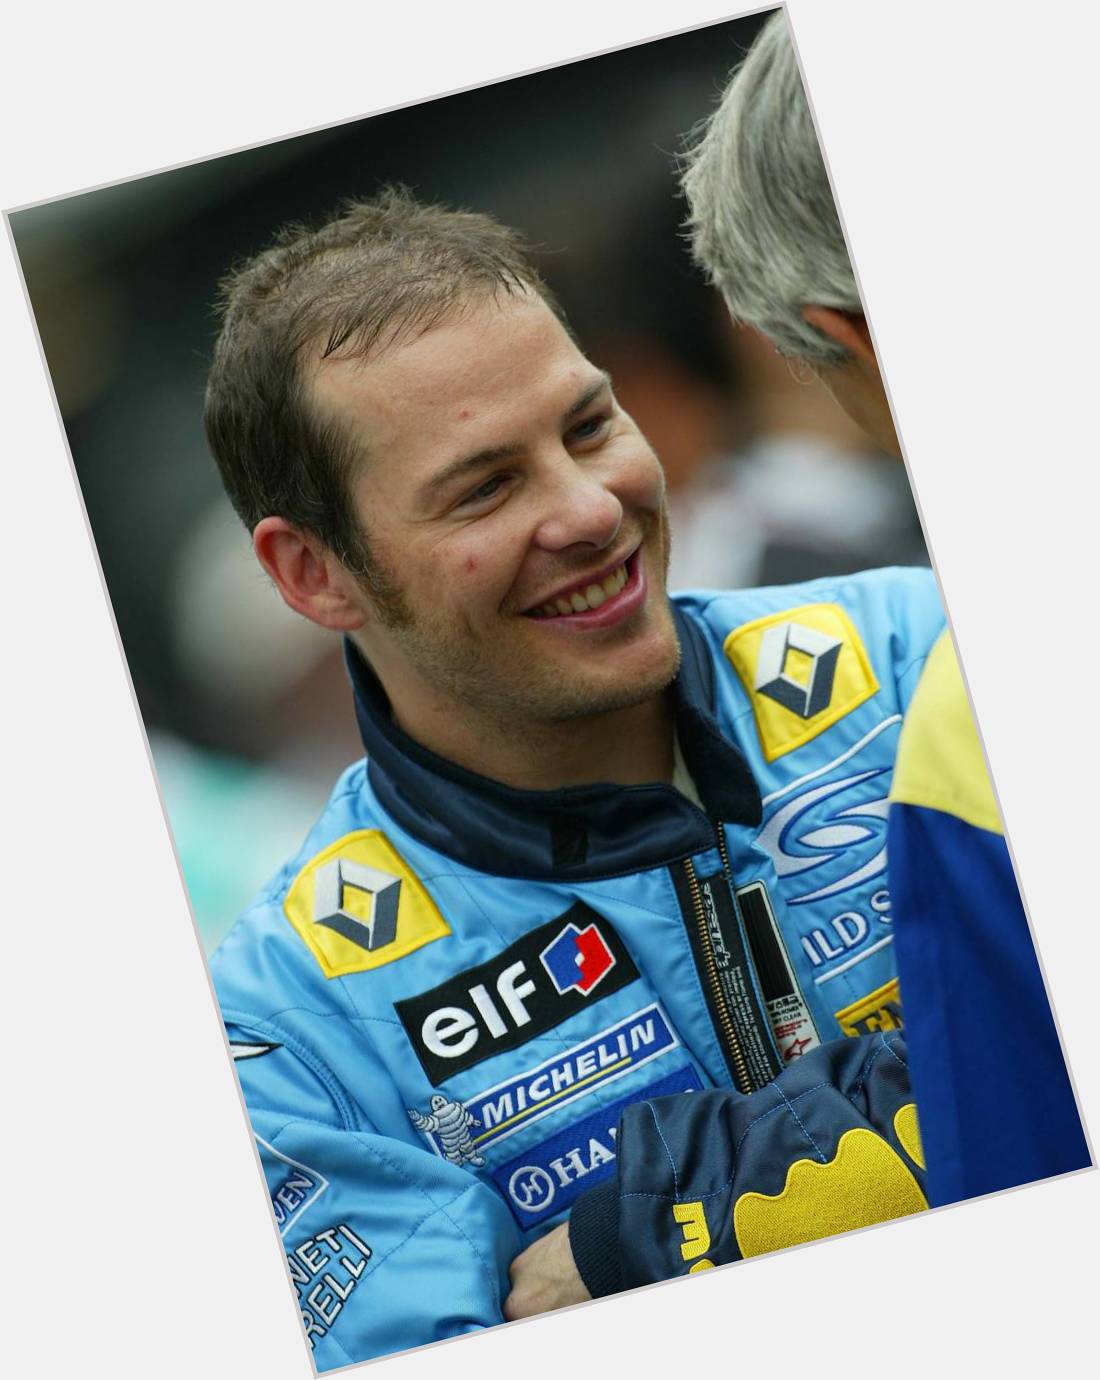  A very happy birthday to the cheeriest driver of them all, Jacques Villeneuve! Here he is at the 2004 